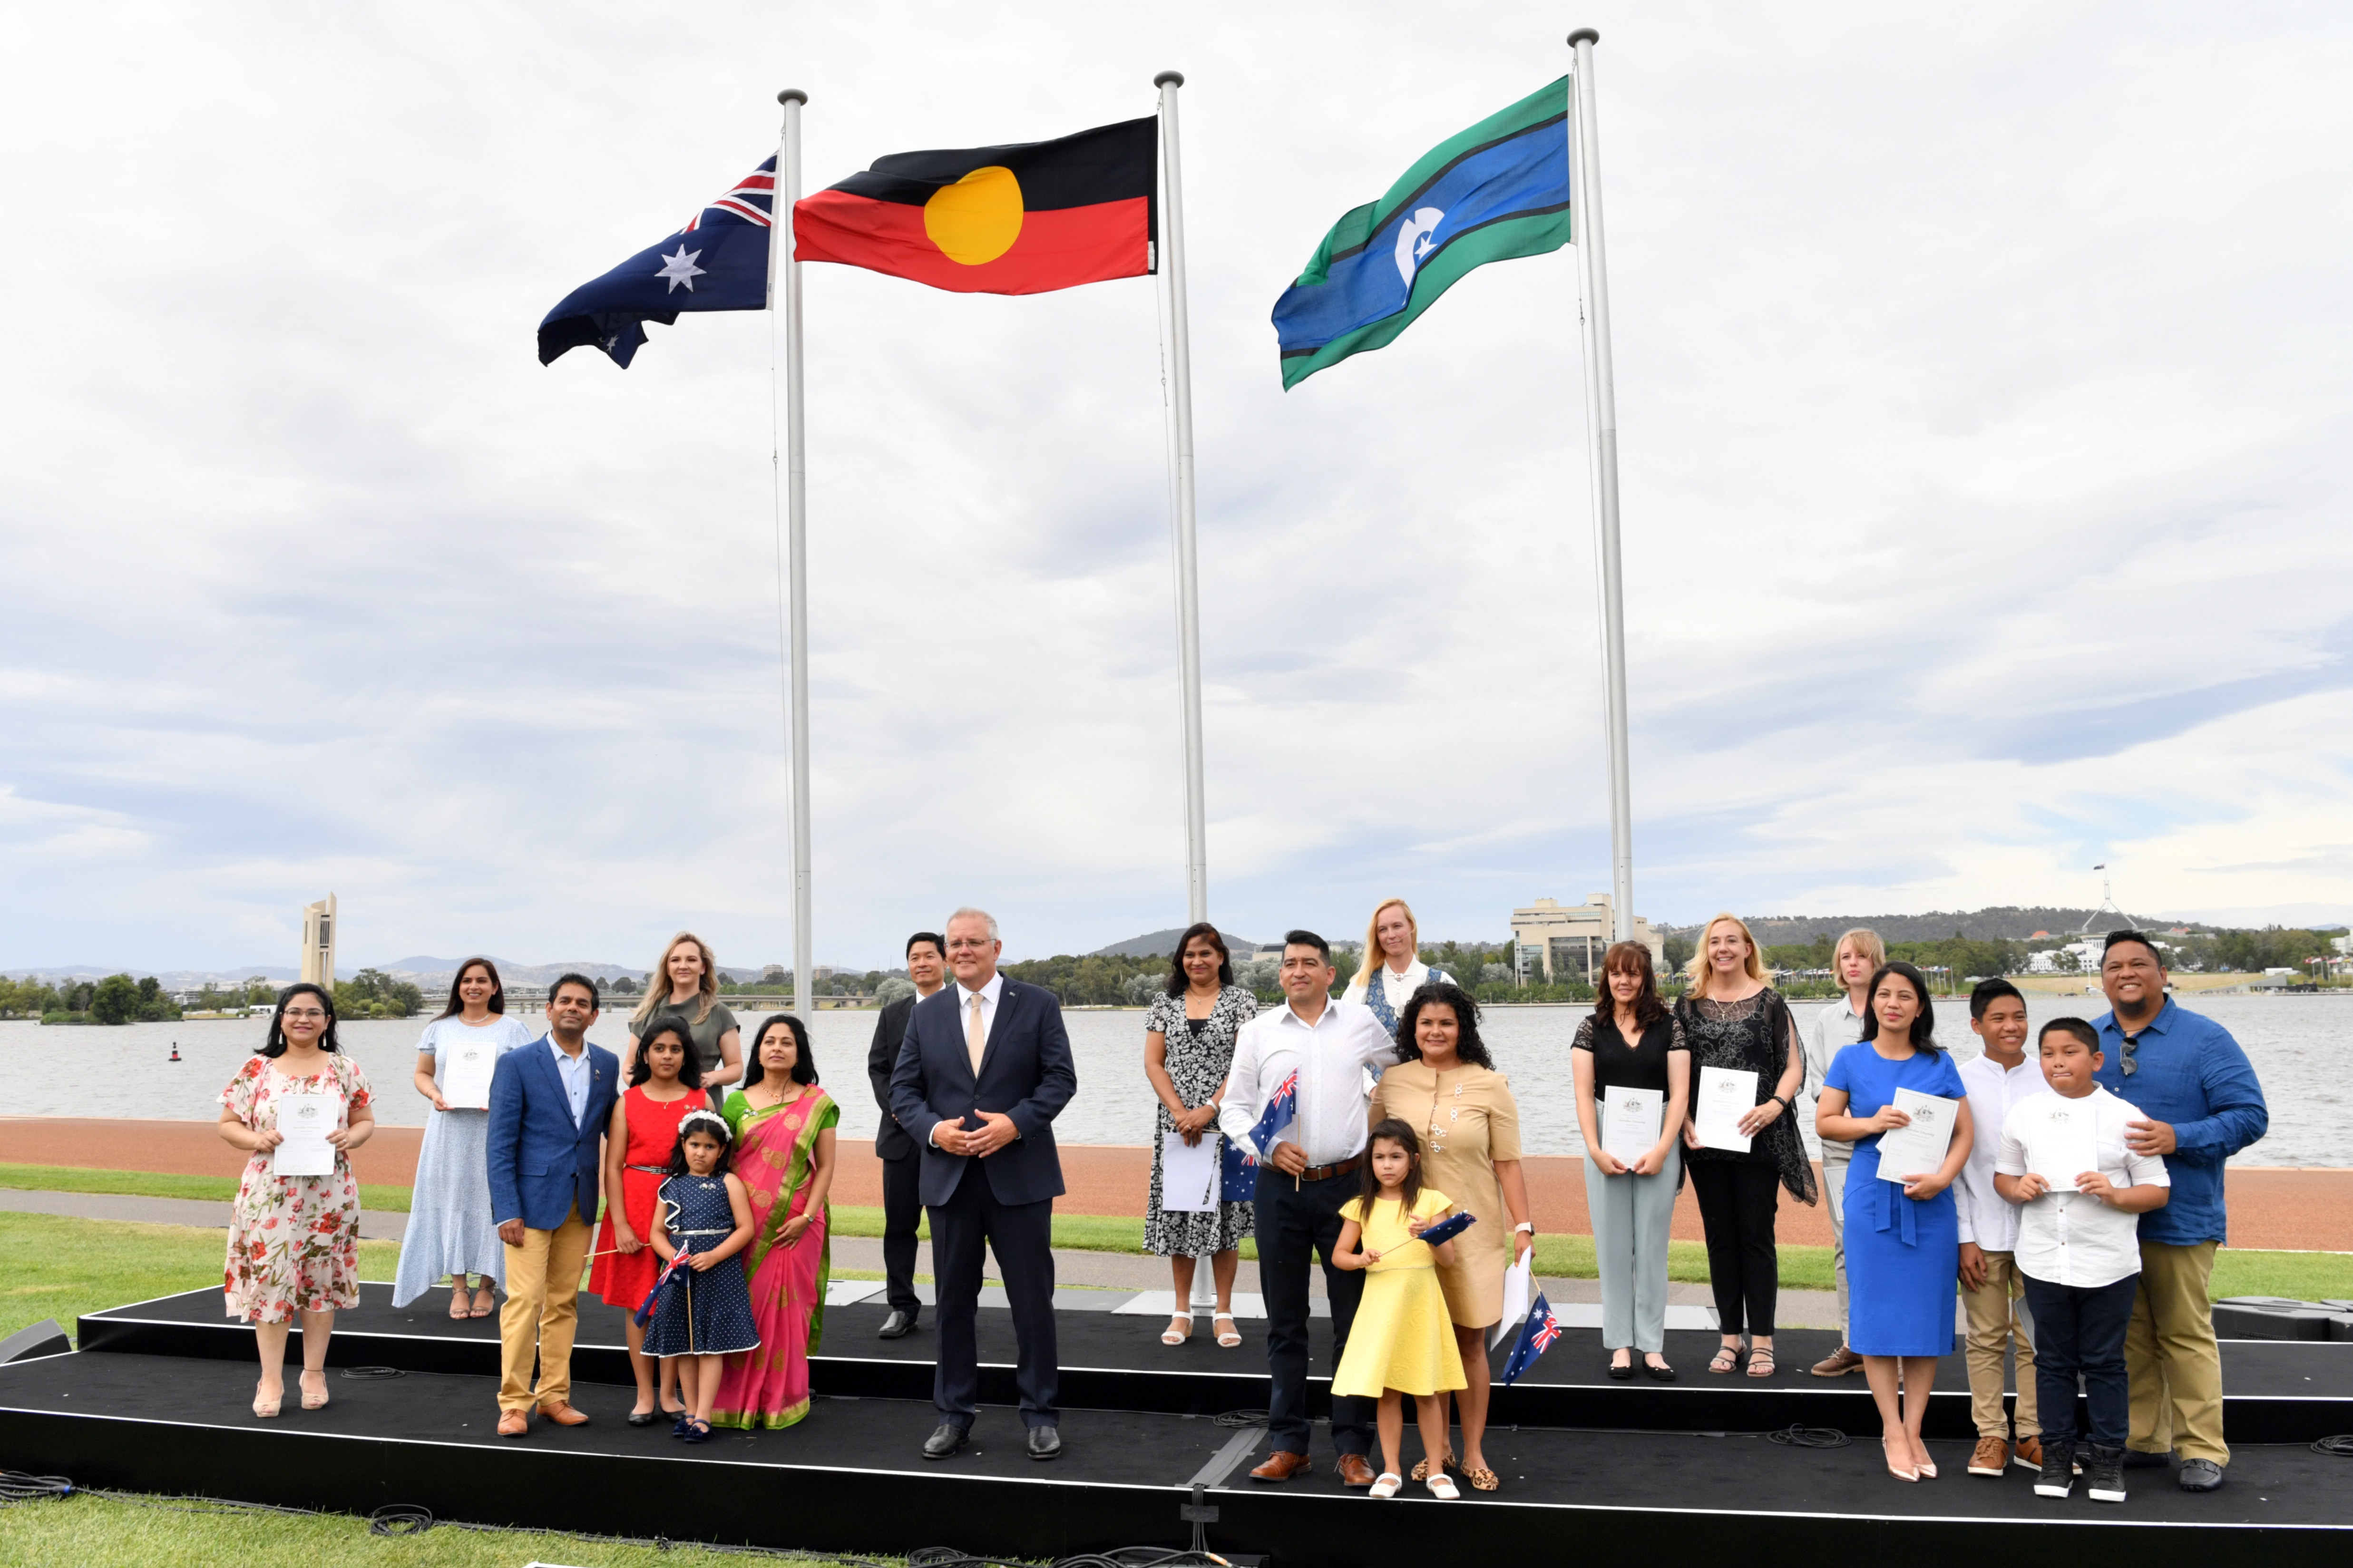 Prime Minister Scott Morrison poses for a photo with new citizens during an Australia Day Citizenship Ceremony and Flag Raising event in Canberra.